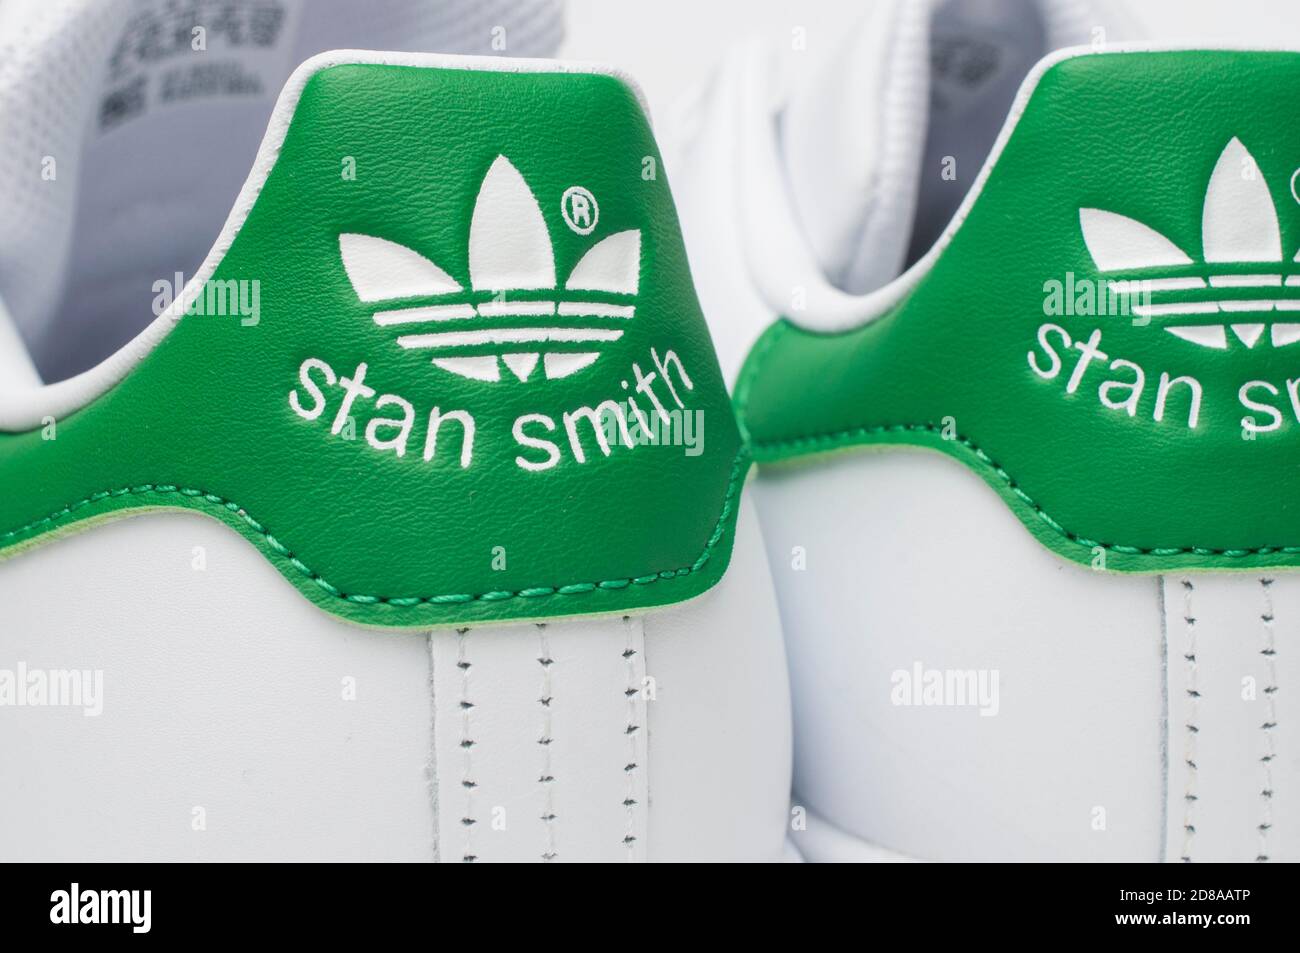 Stan smith sneaker hi-res stock photography and - Alamy